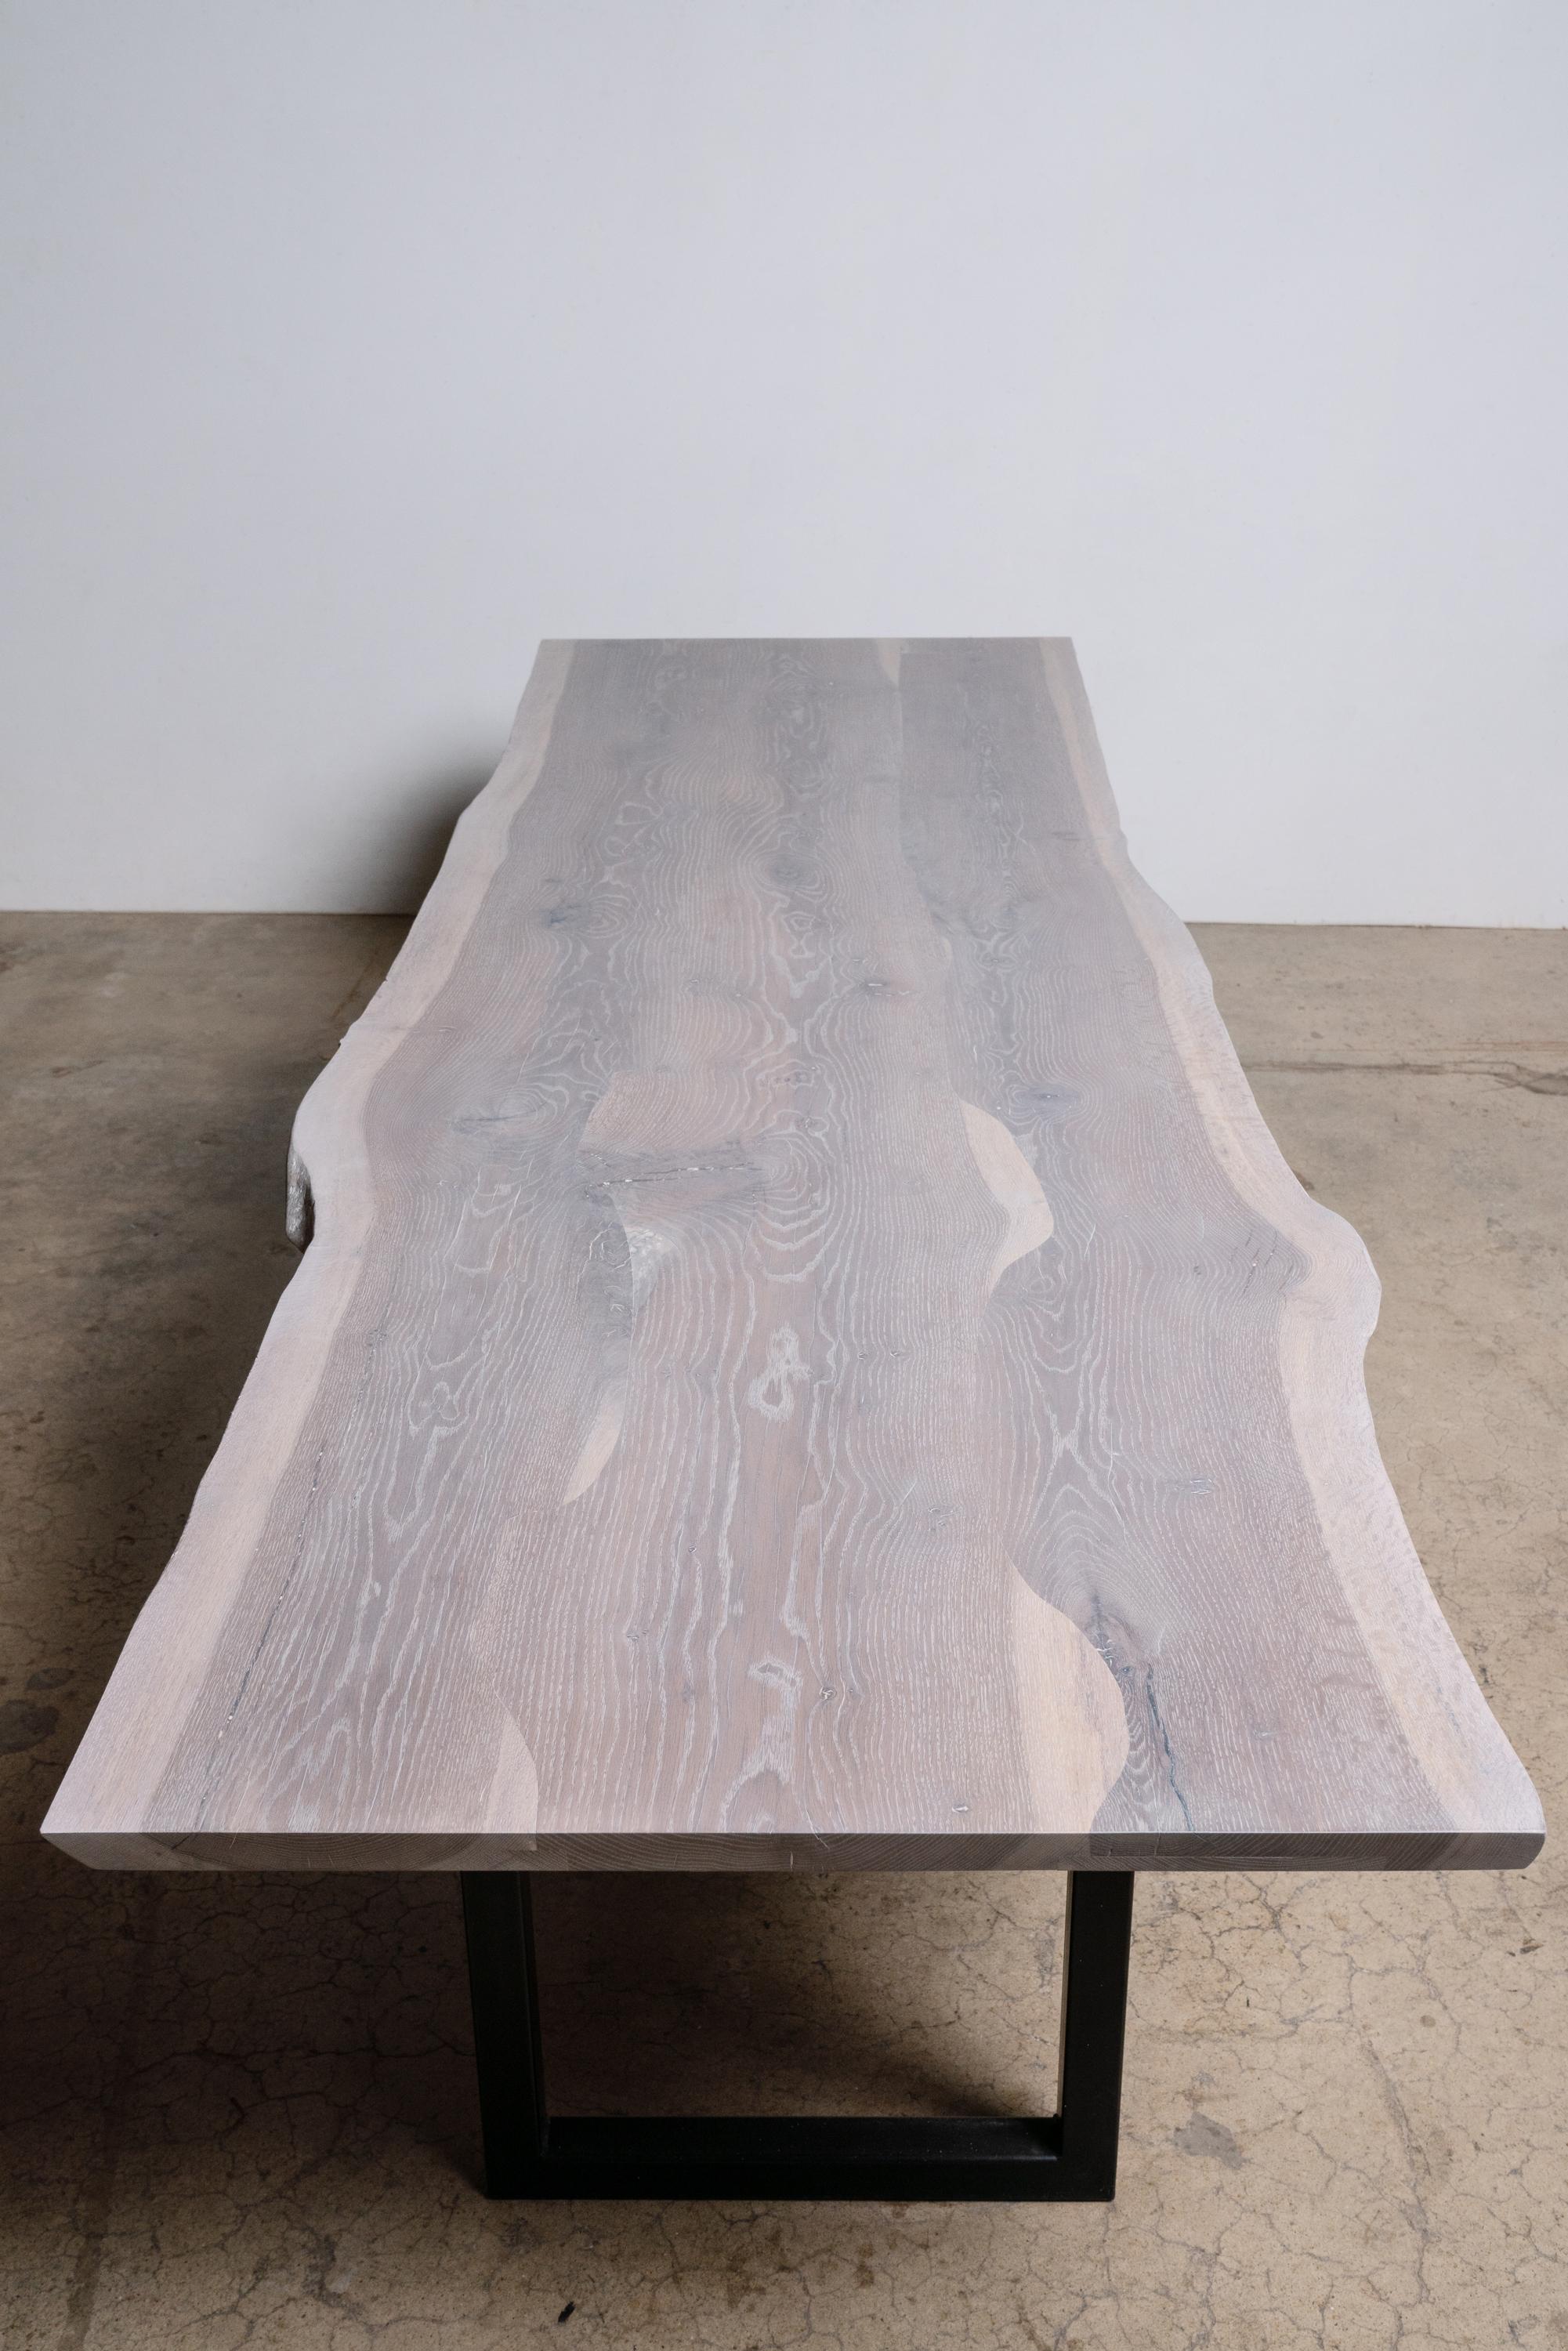 We call our live edge white oak table gray finish on modern black steel square base a 